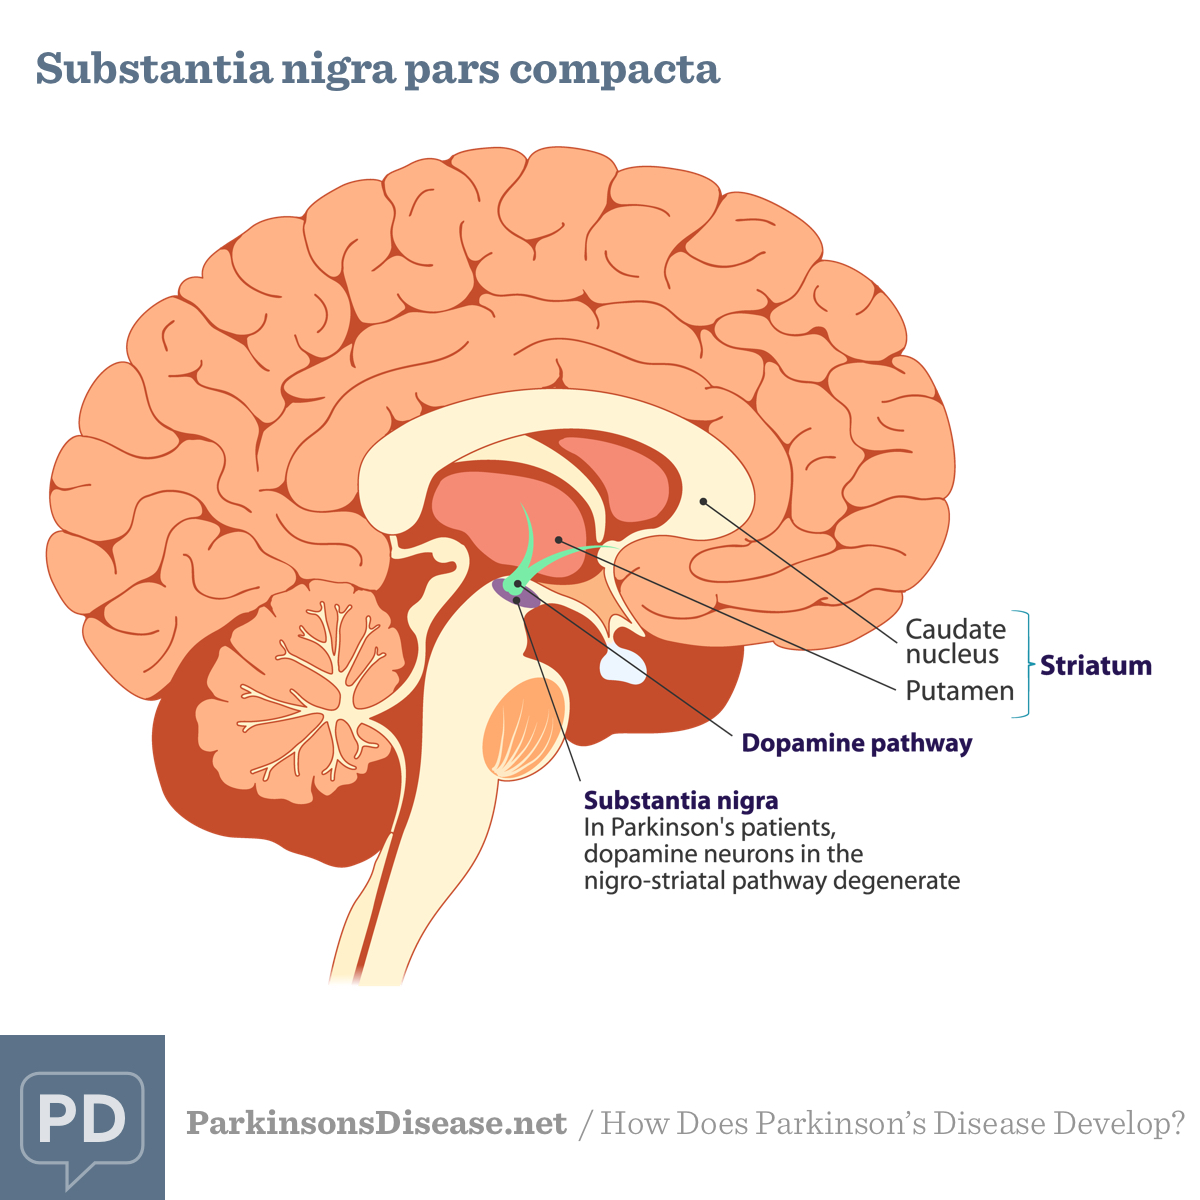 Area of the brain affected by Parkinson's disease, called substantia nigra pars compacta